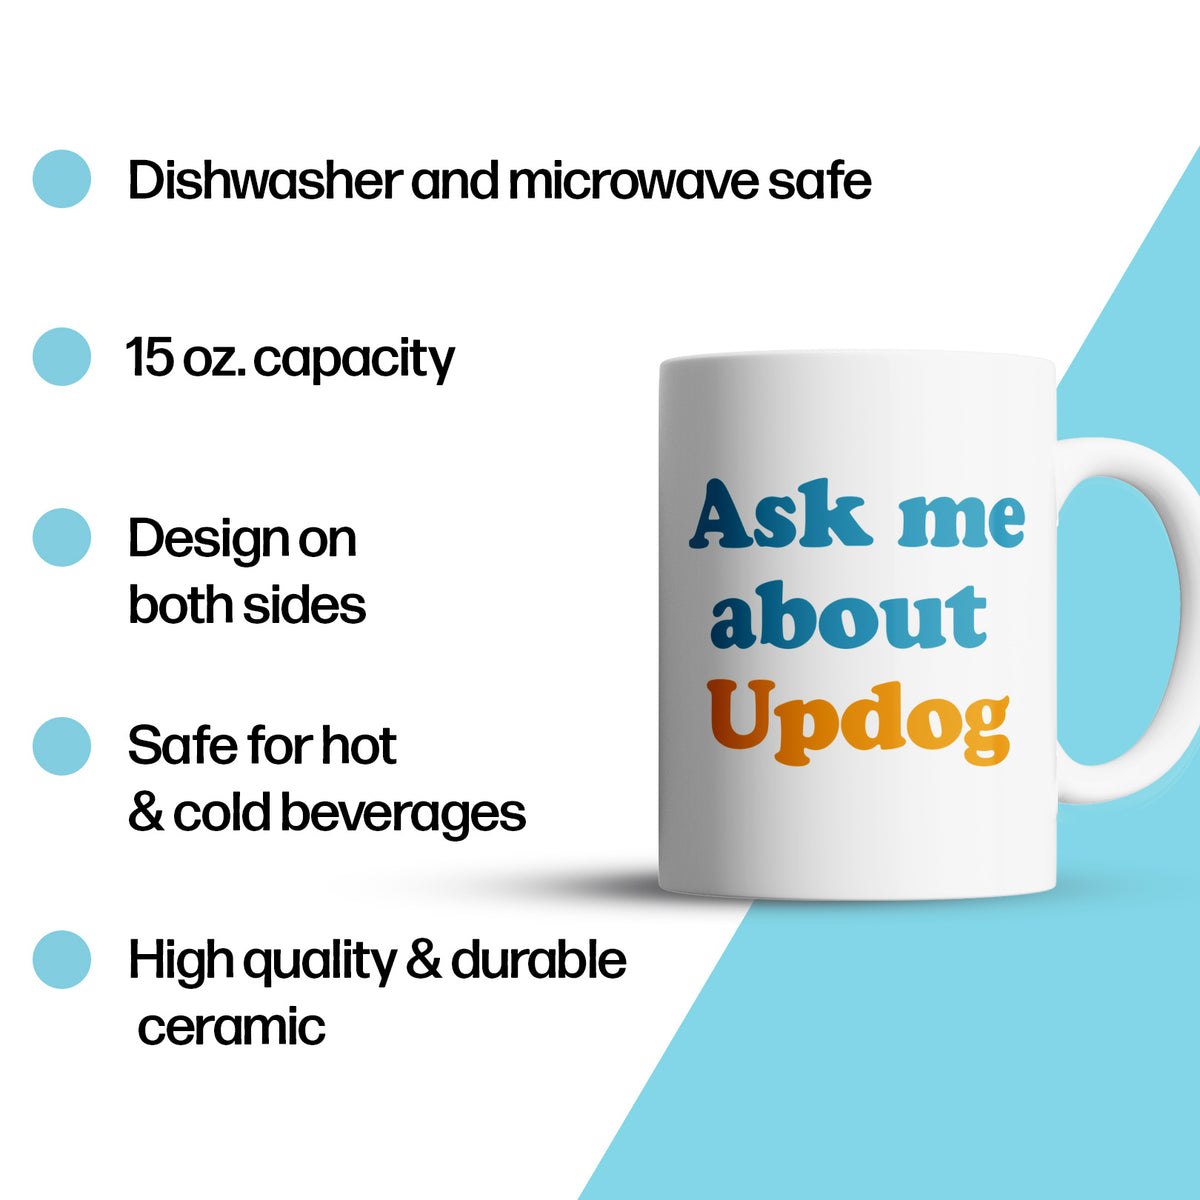 "Ask Me About Updog" Large 15oz Mug - Funny Gift for Friends, Family